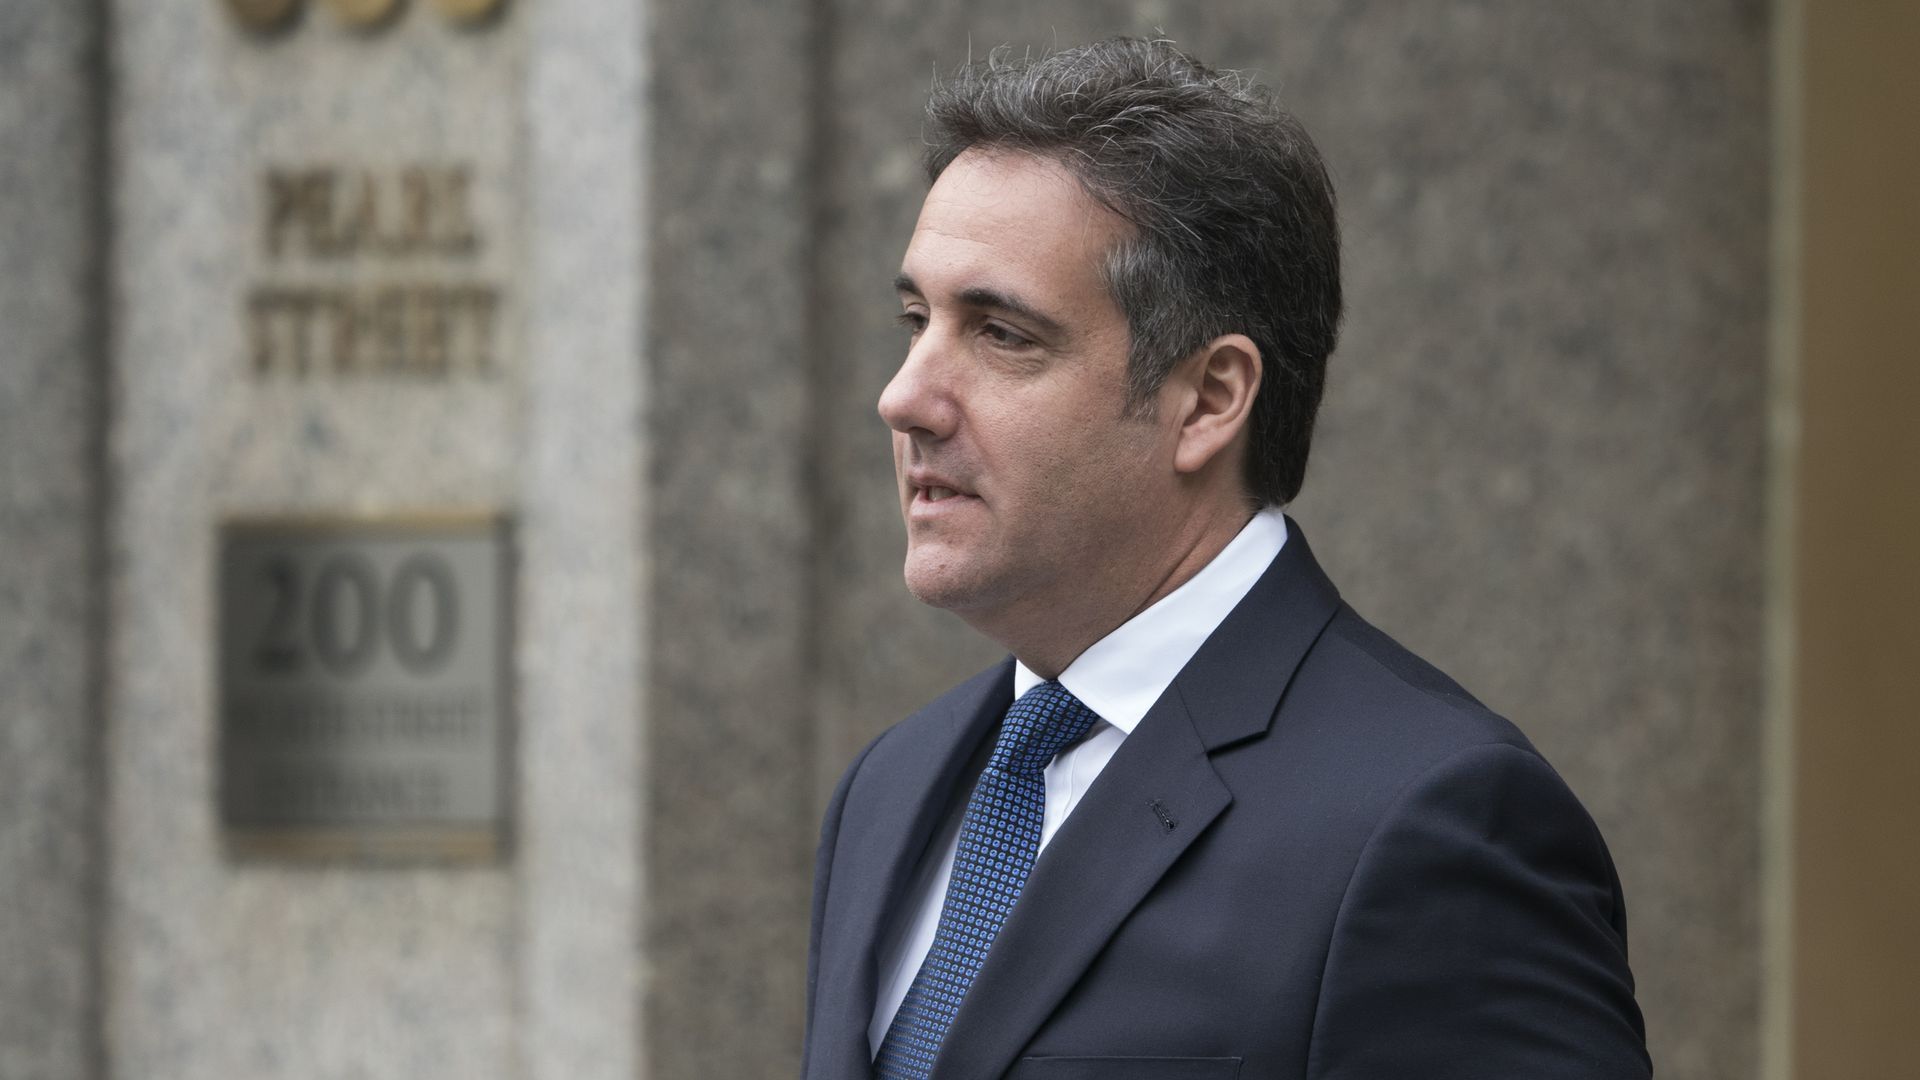 Michael Cohen looks tired and surprised.